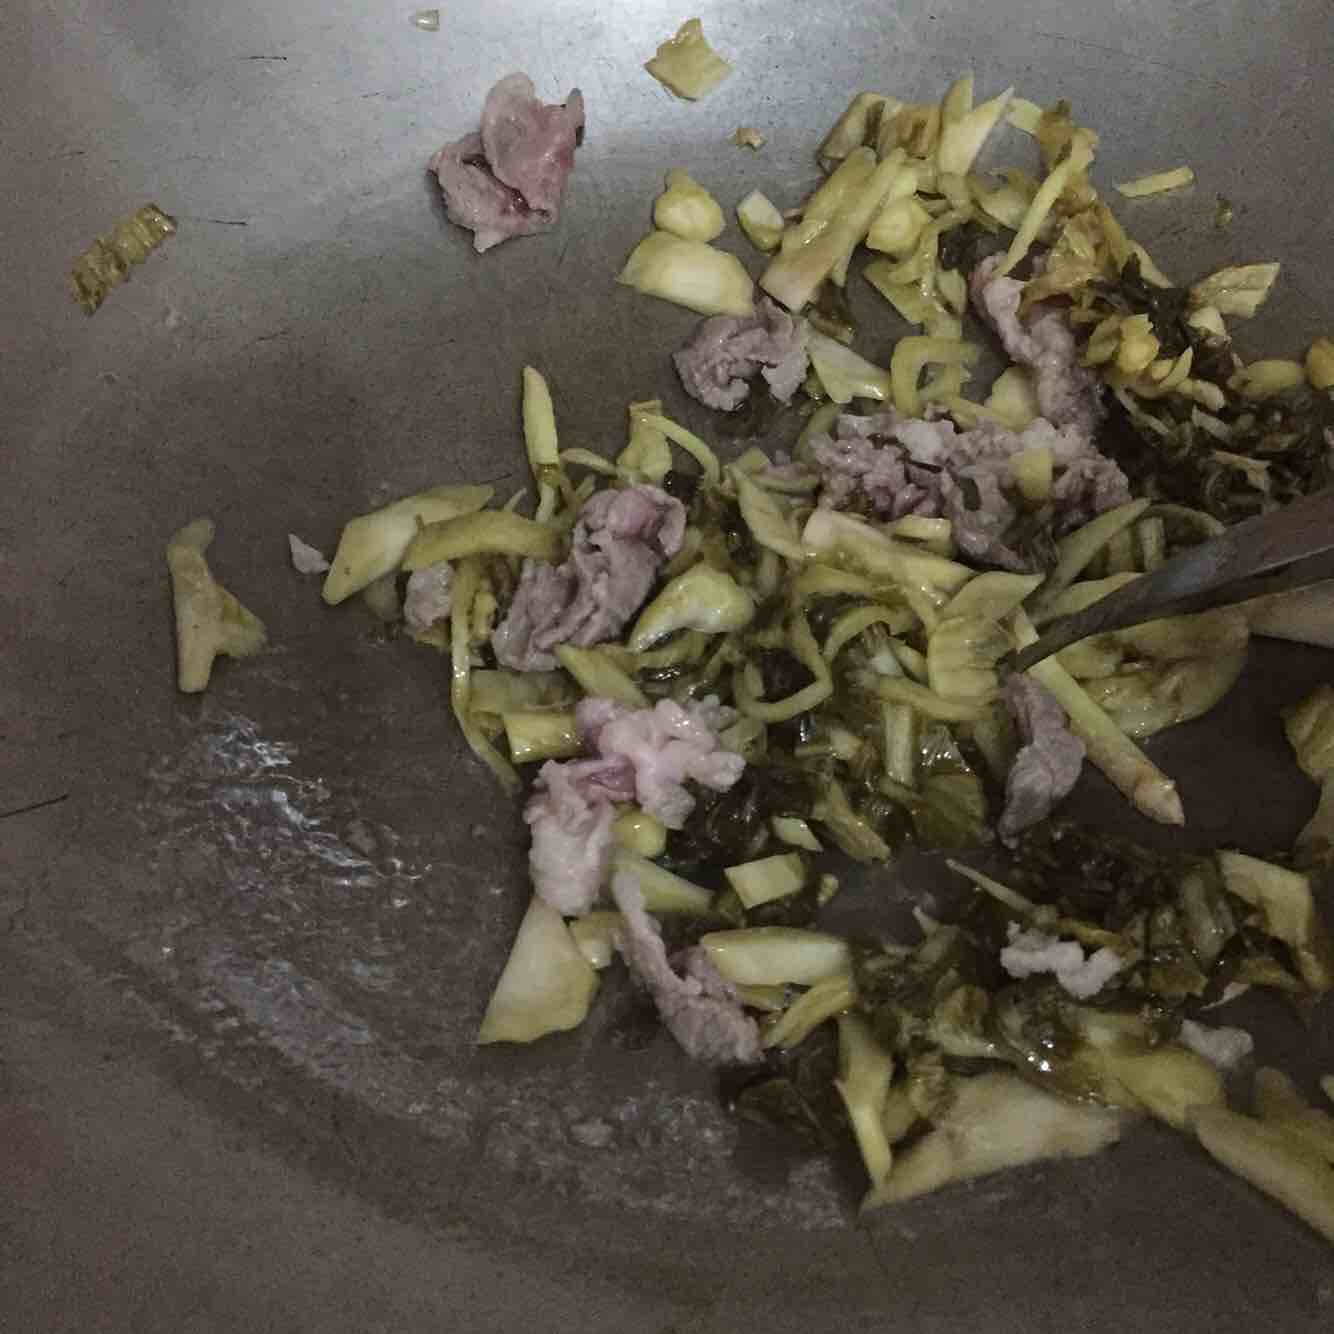 Fans of Sauerkraut Pork Slices Who Do Not Imitate Others recipe